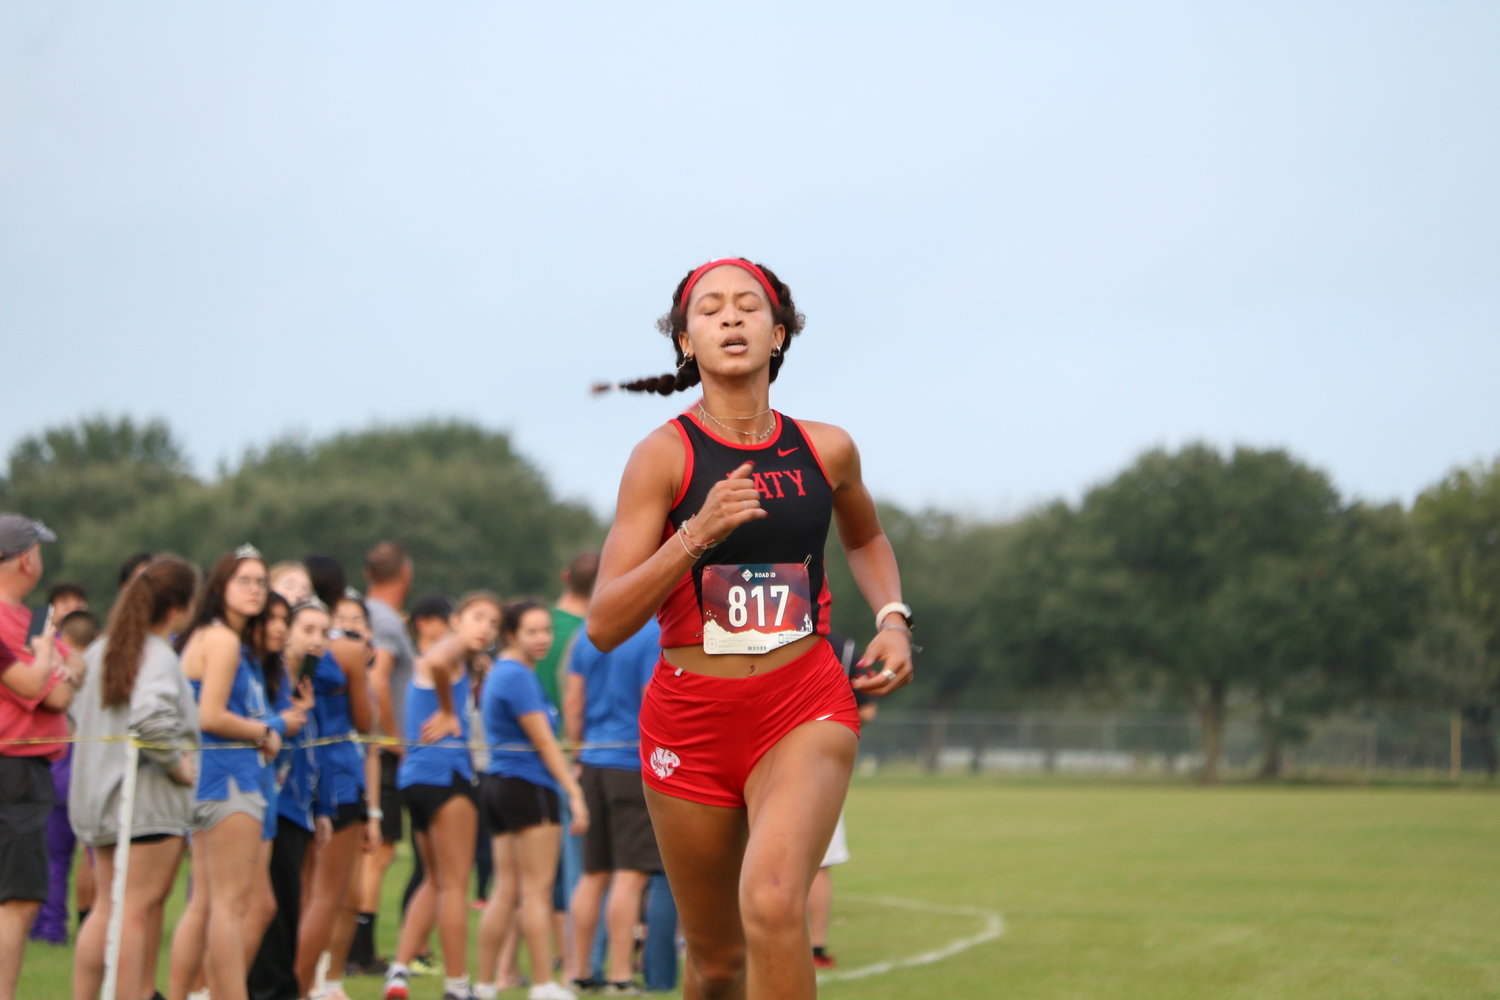 Isabella Rubio races towards the finish during Tuesday's District 19-6A meet at Paul Rushing Park.